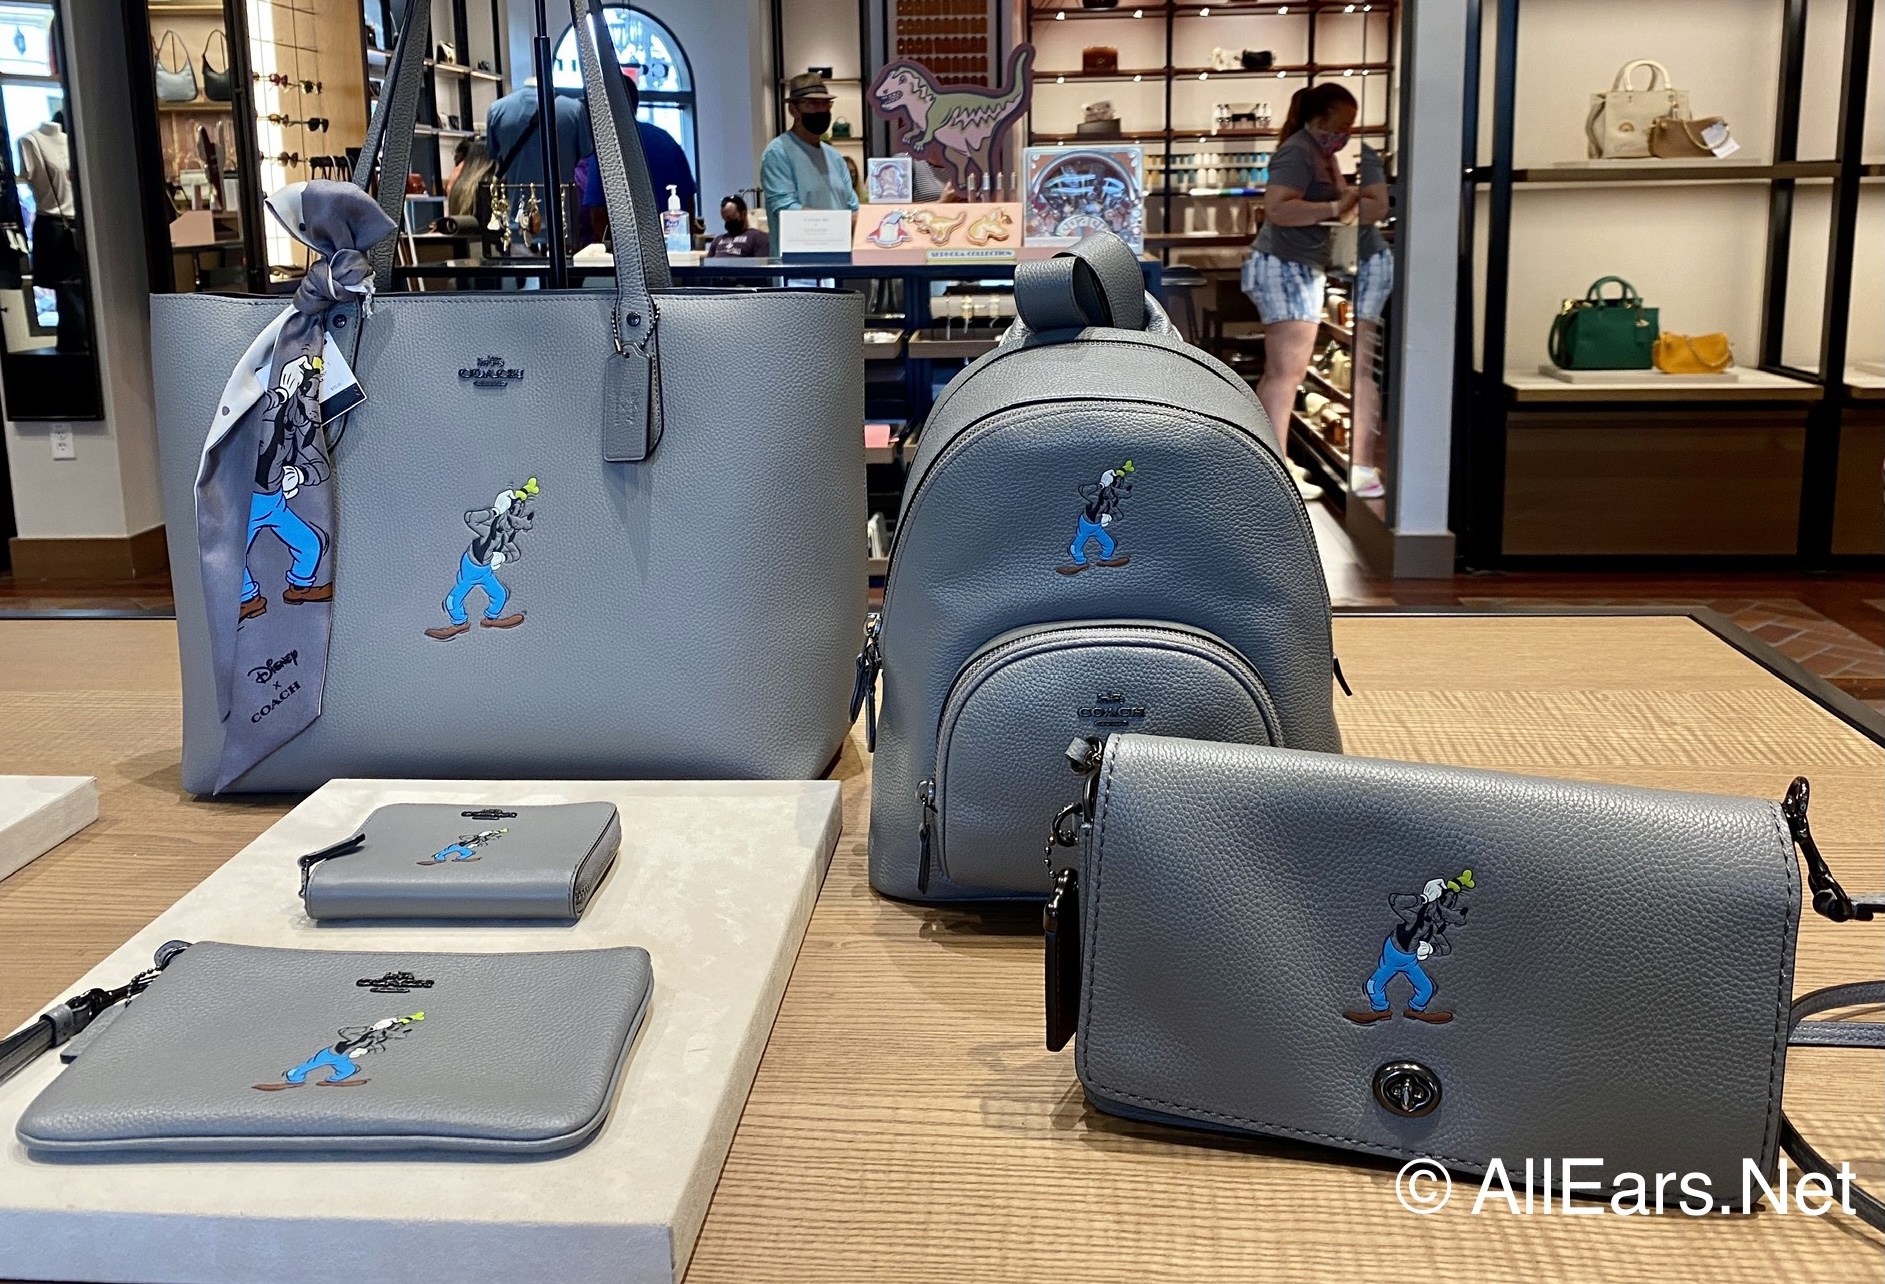 What's In The Disney x Coach Spring 2019 Collection? Your Favorite